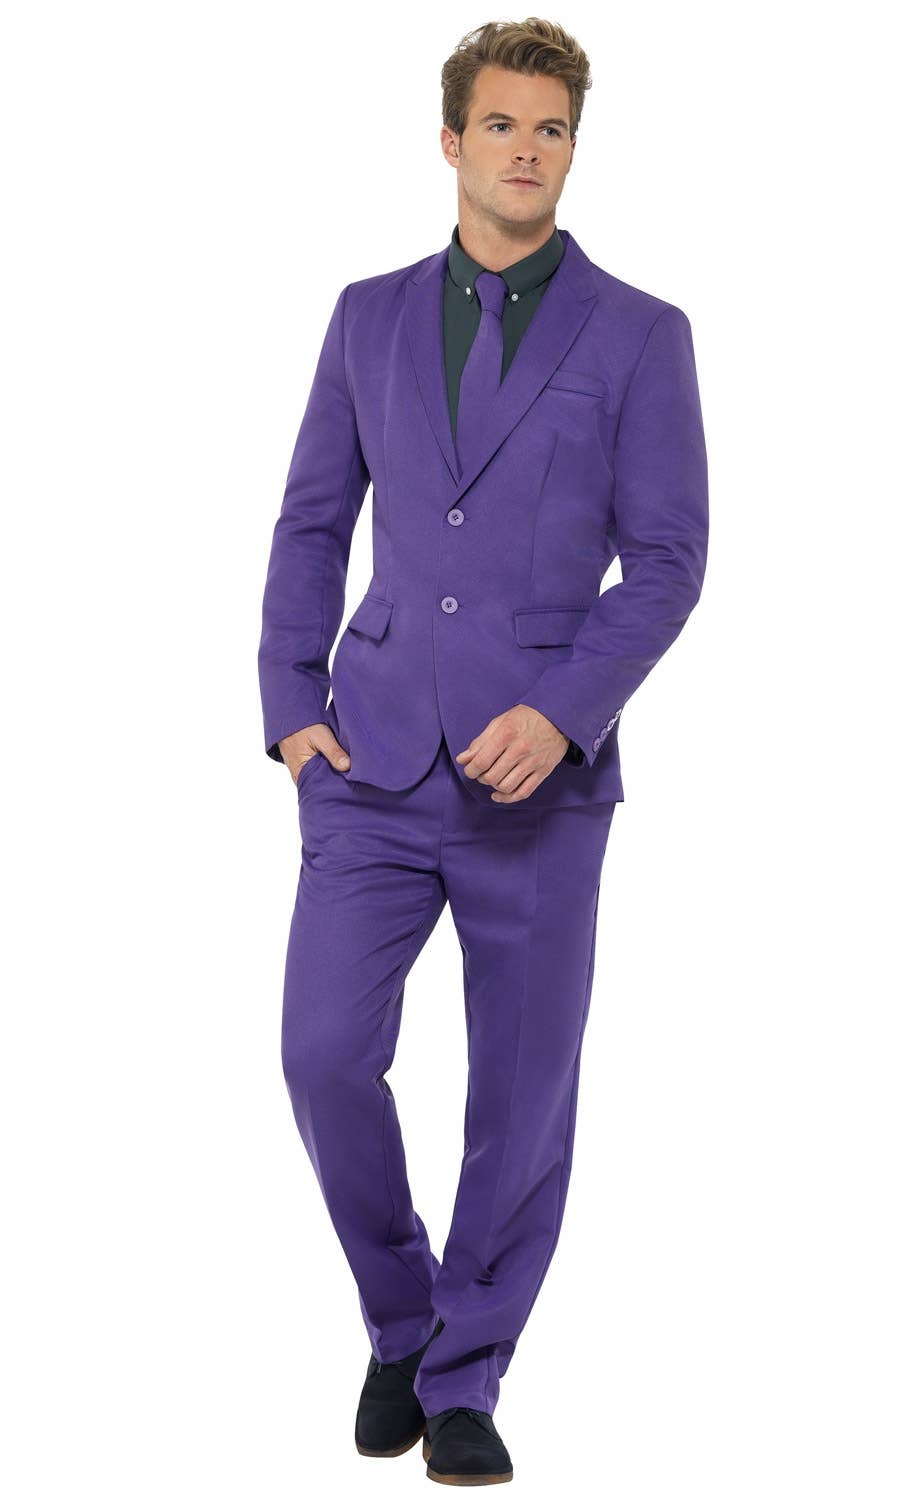 Deluxe Men's Bright Purple Suit from Stand Out Suits Image 1